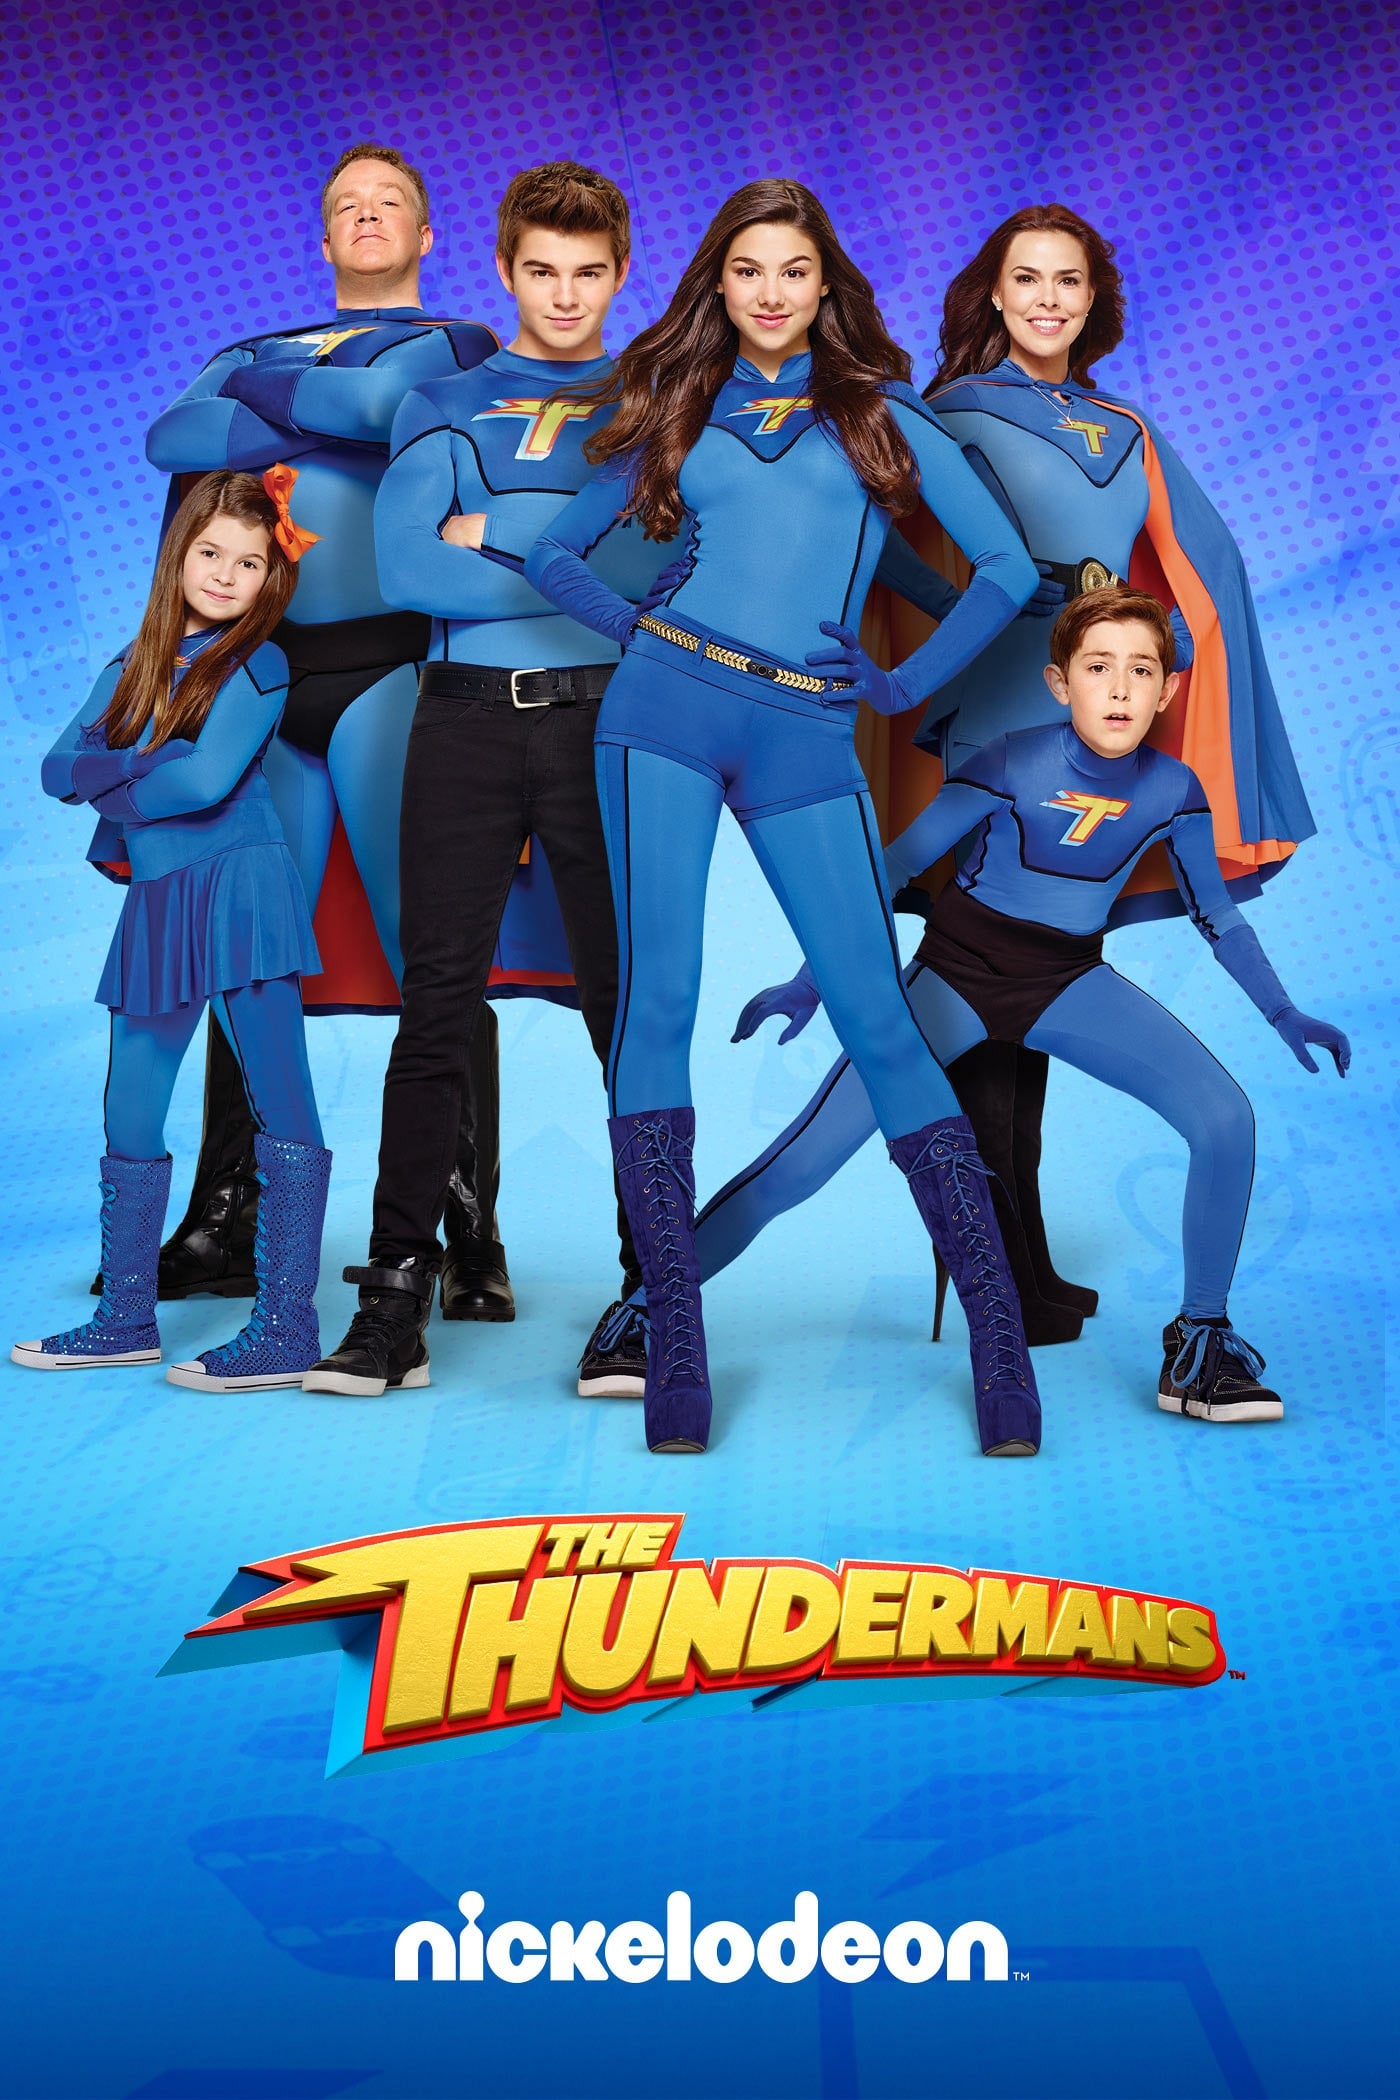 The Thundermans TV Shows About Teen Superhero